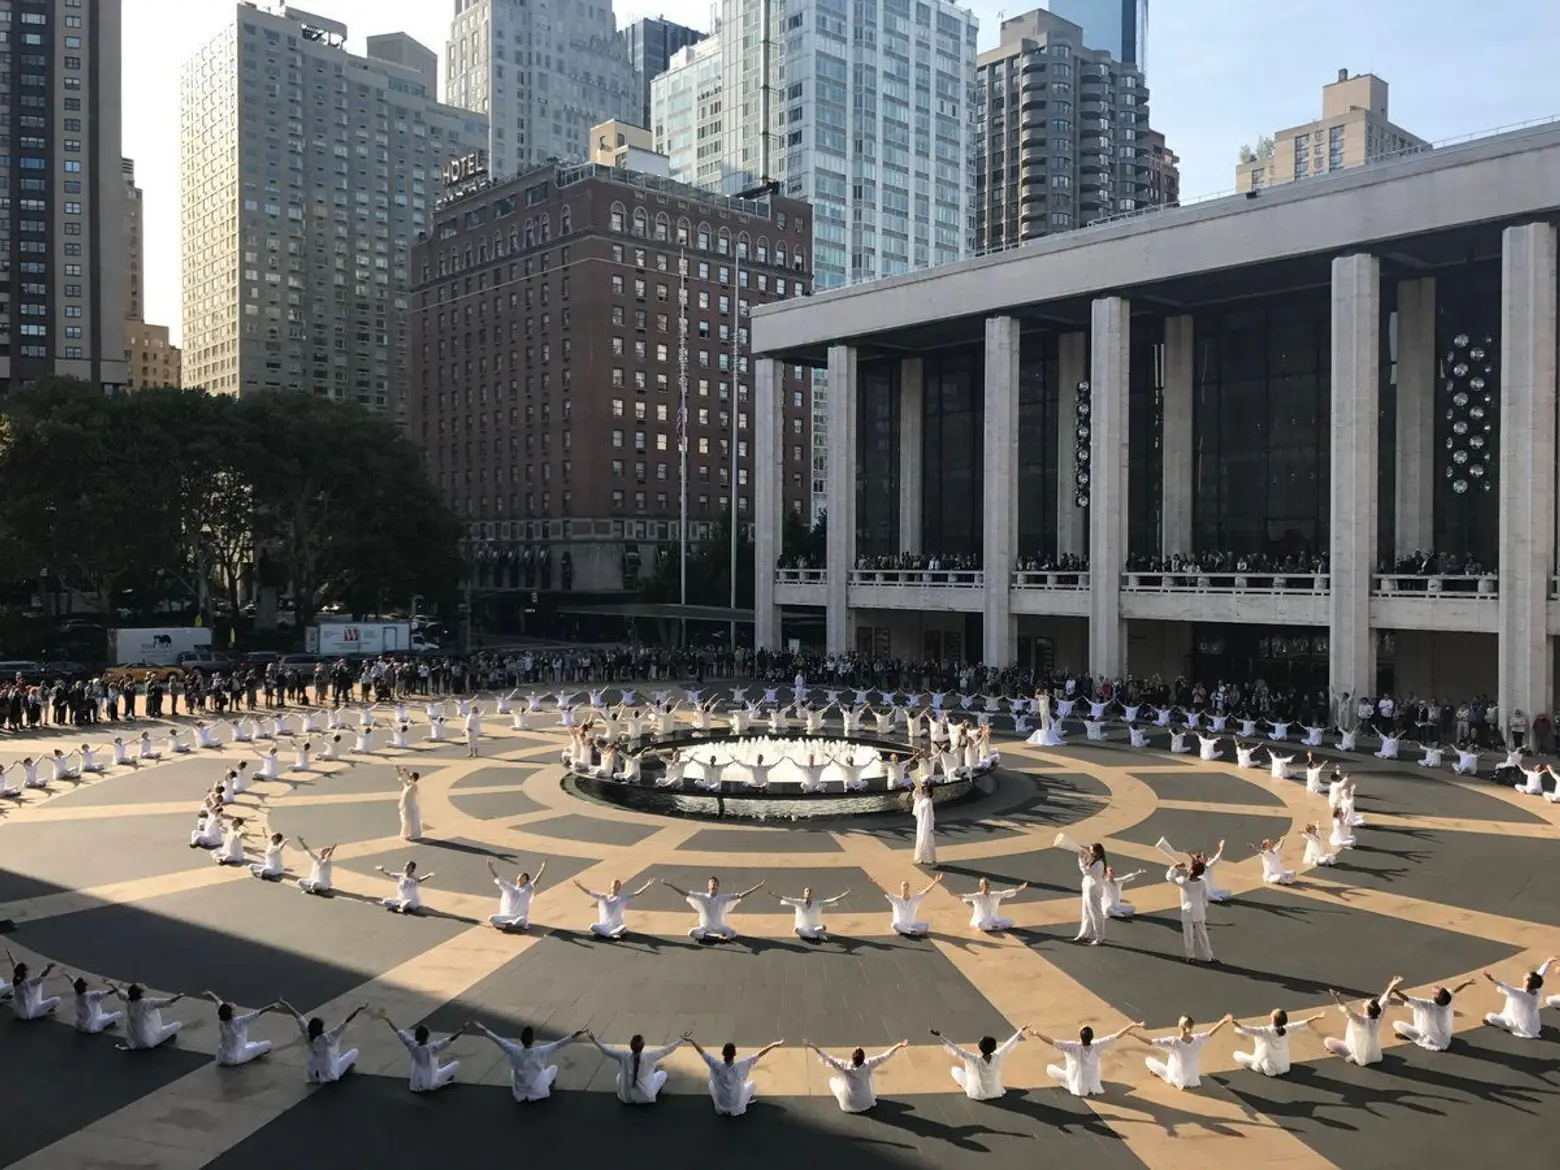 Annual 9/11 dance tribute at Lincoln Center will be live streamed